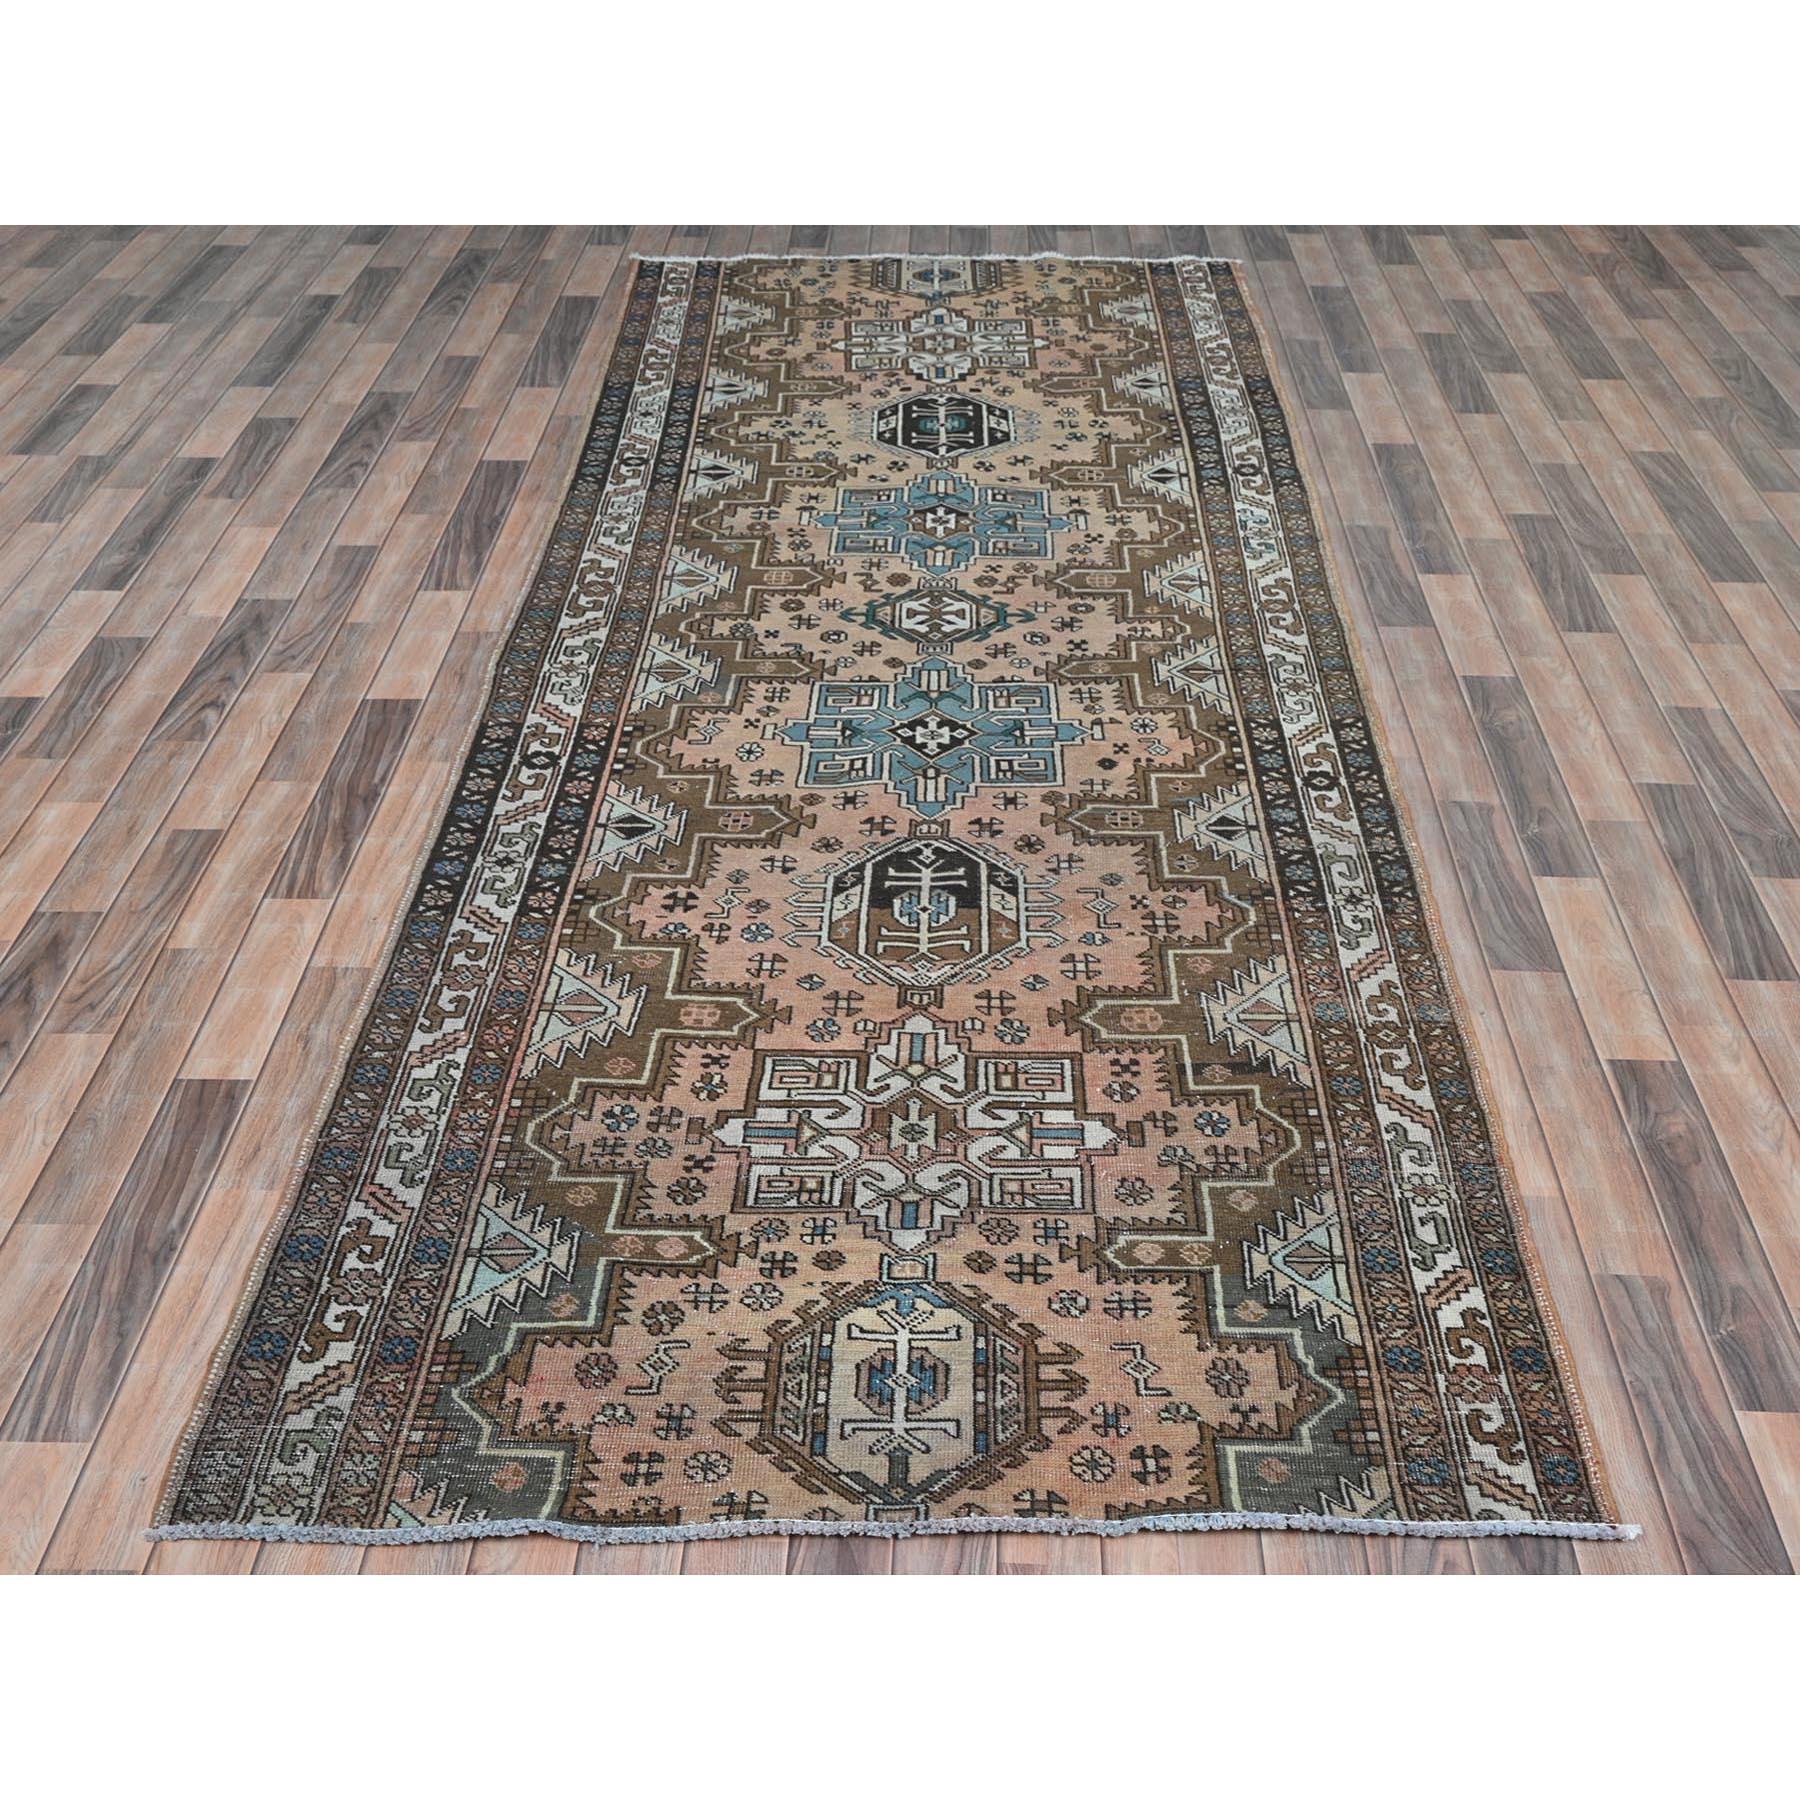 This fabulous Hand-Knotted carpet has been created and designed for extra strength and durability. This rug has been handcrafted for weeks in the traditional method that is used to make
Exact rug size in feet and inches : 4'7